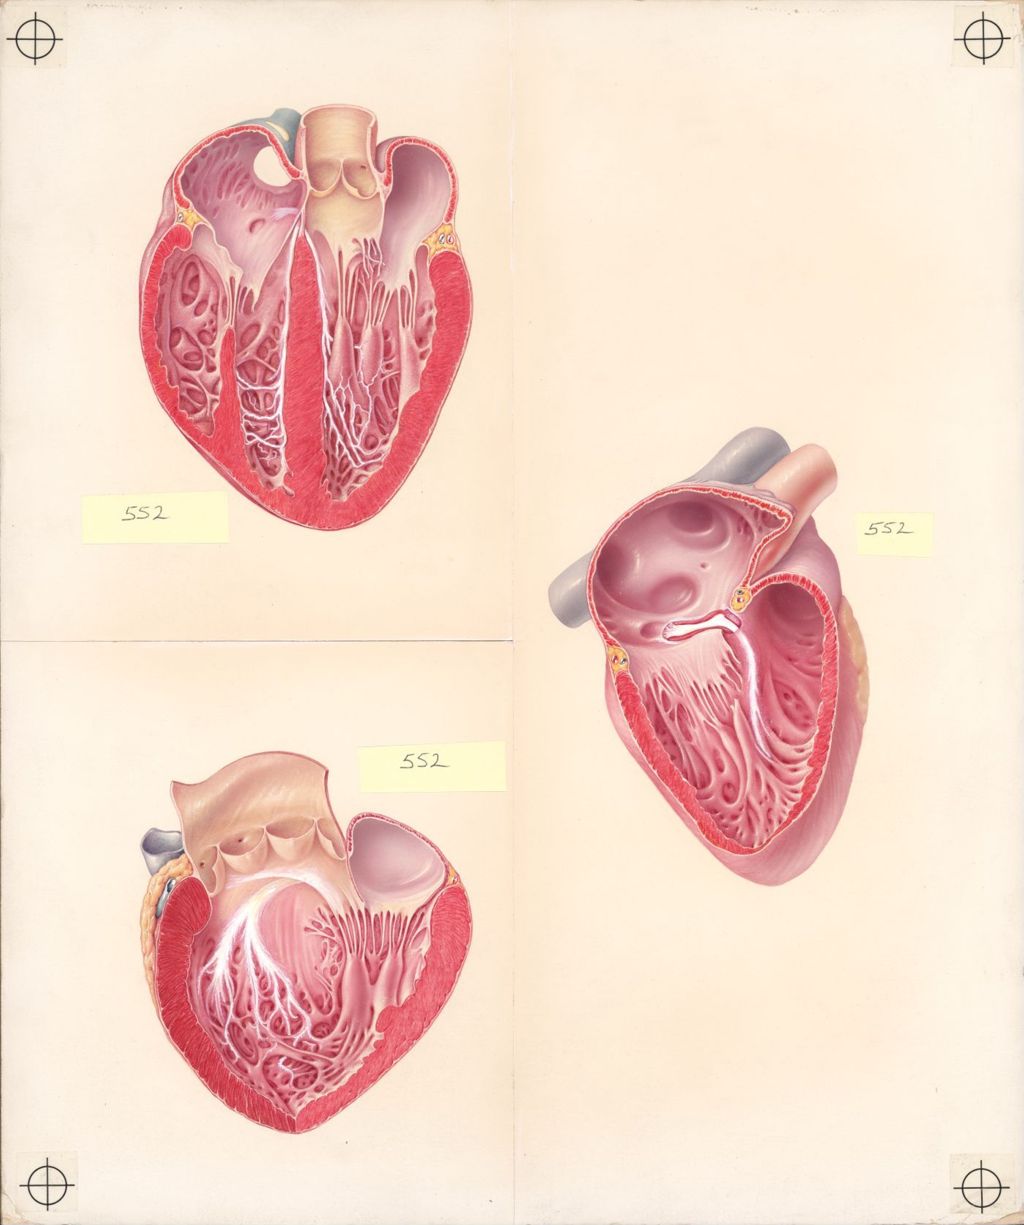 Explanatory Atlas, the Autonomic Innervation of the Heart, Plate II, The Conduction System of the Heart